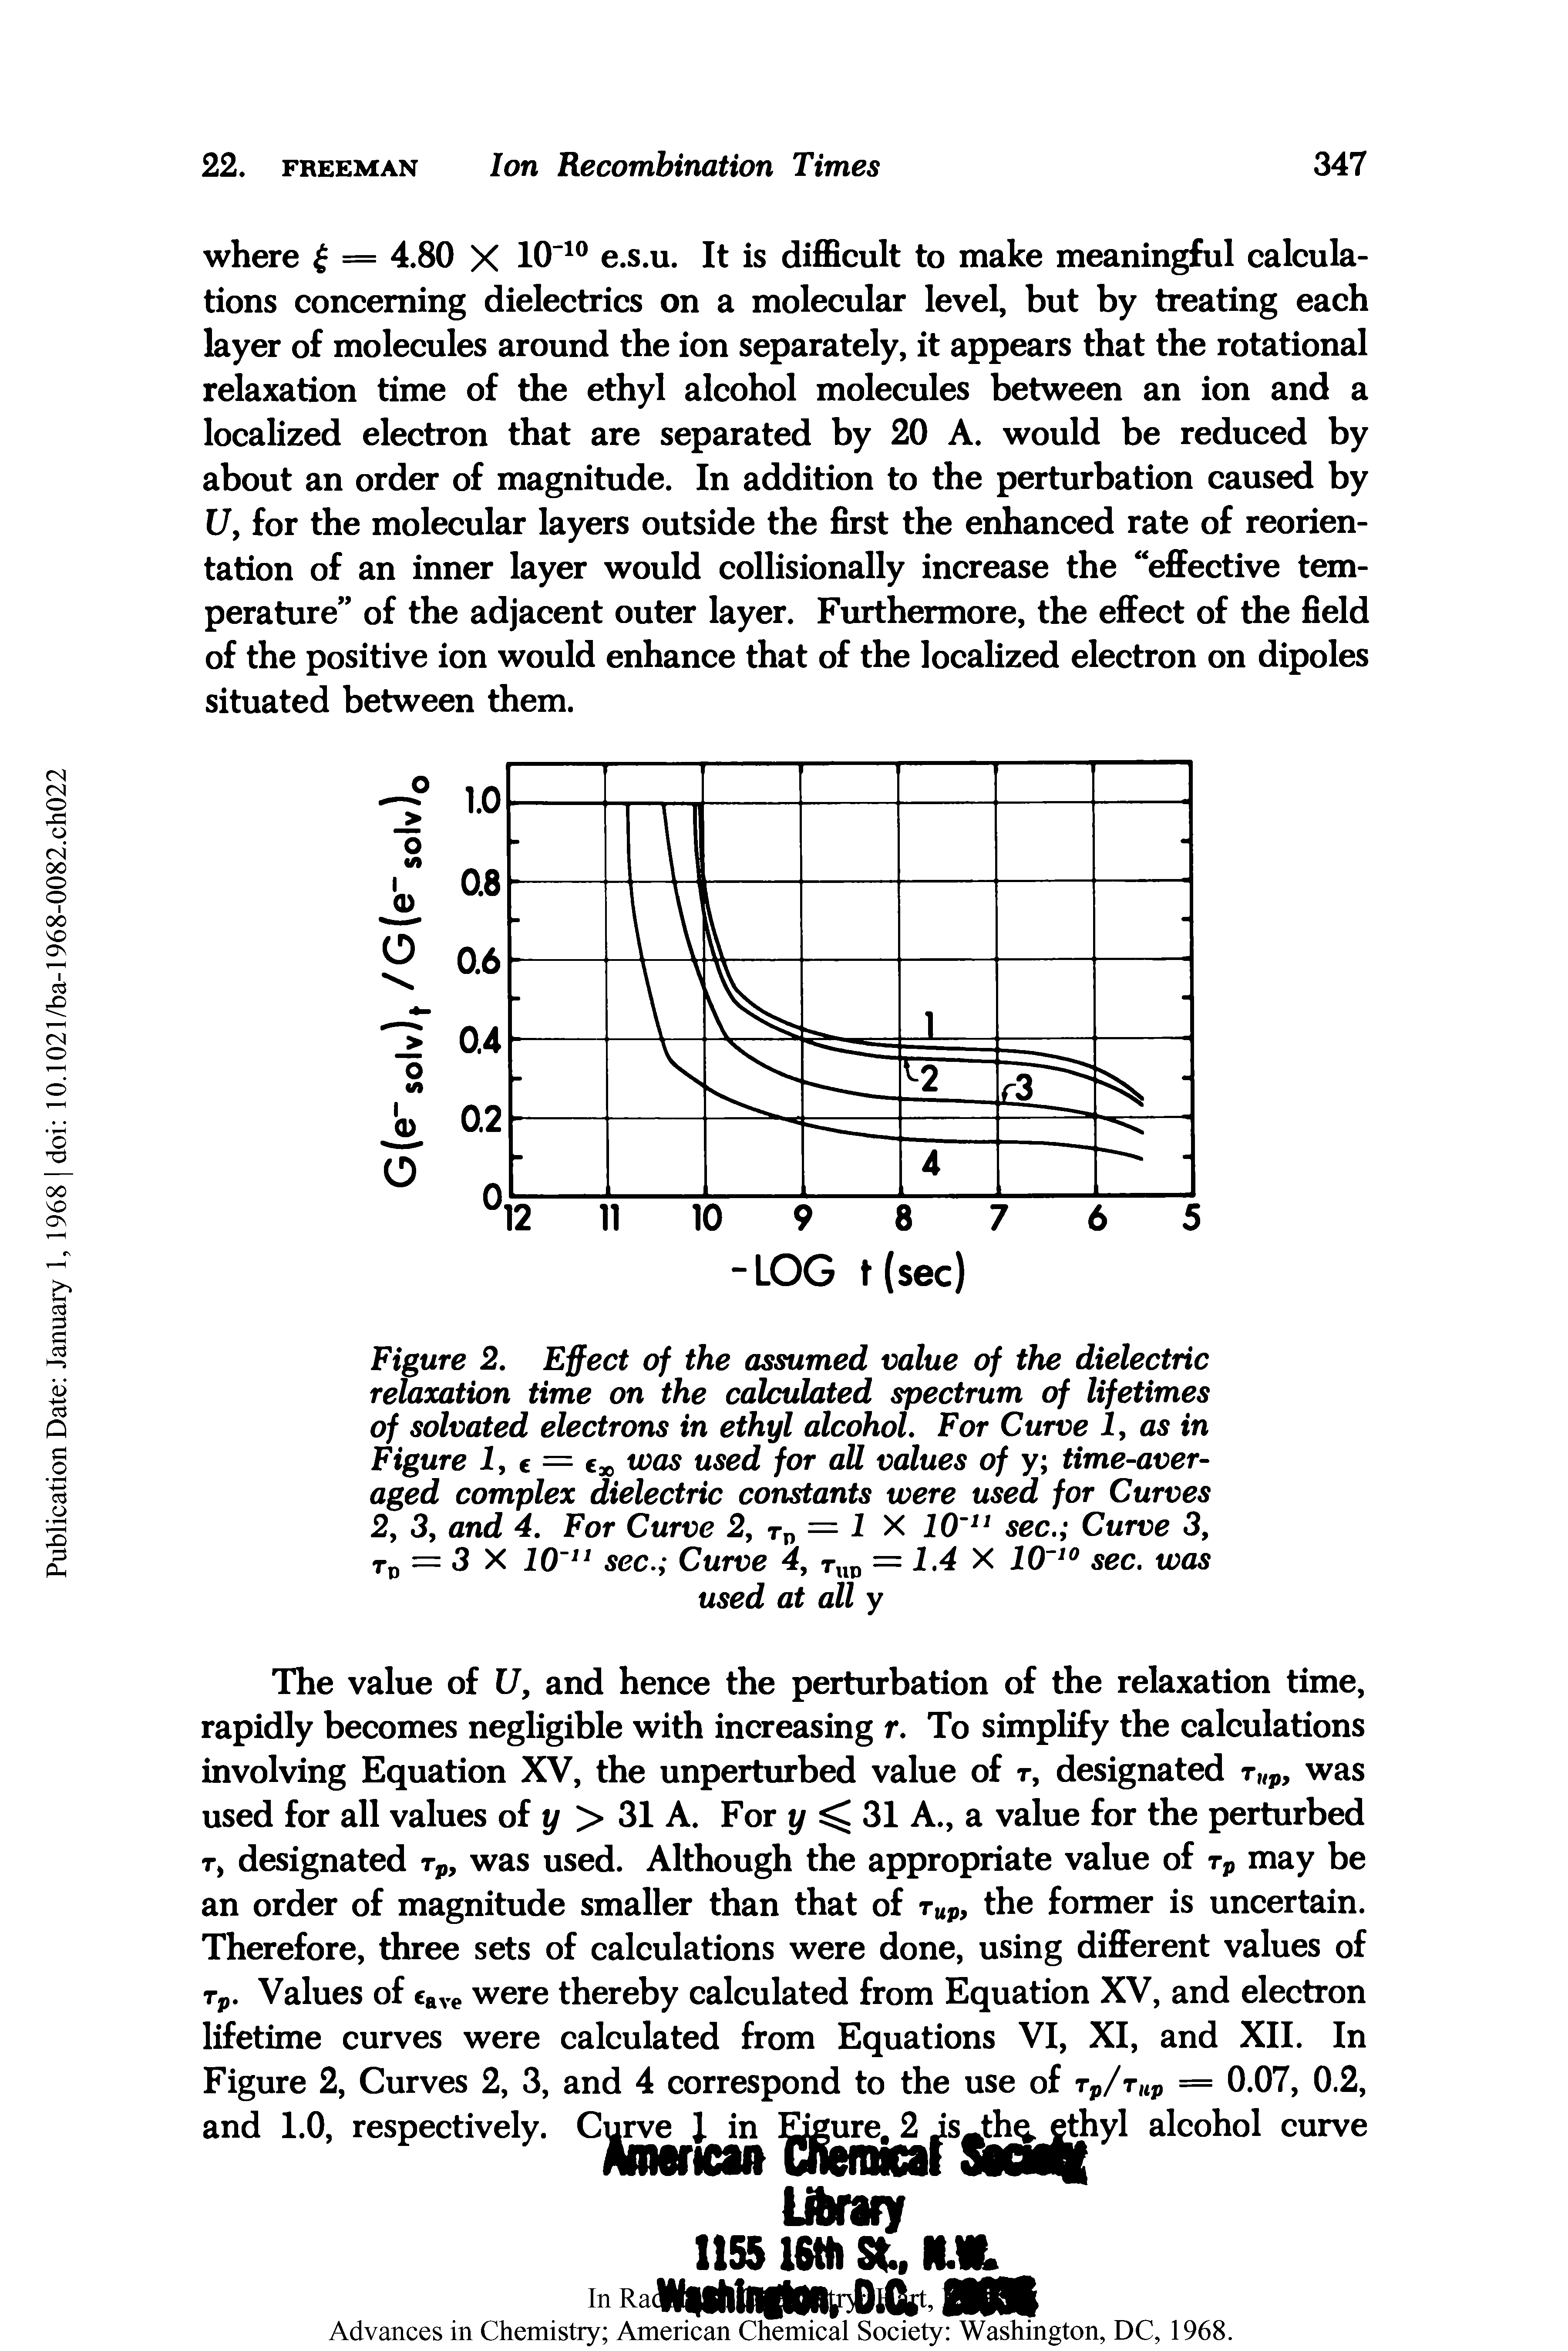 Figure 2. Effect of the assumed value of the dielectric relaxation time on the calculated spectrum of lifetimes of solvated electrons in ethyl alcohol. For Curve I, as in Figure I, e = ex was used for all values of y time-averaged complex dielectric constants were used for Curves 2, 3, and 4. For Curve 2, td = 1 X 10 11 sec. Curve 3, t = 3X 10 n sec. Curve 4, Tud = 1.4 X 10 10 sec. was used at all y...